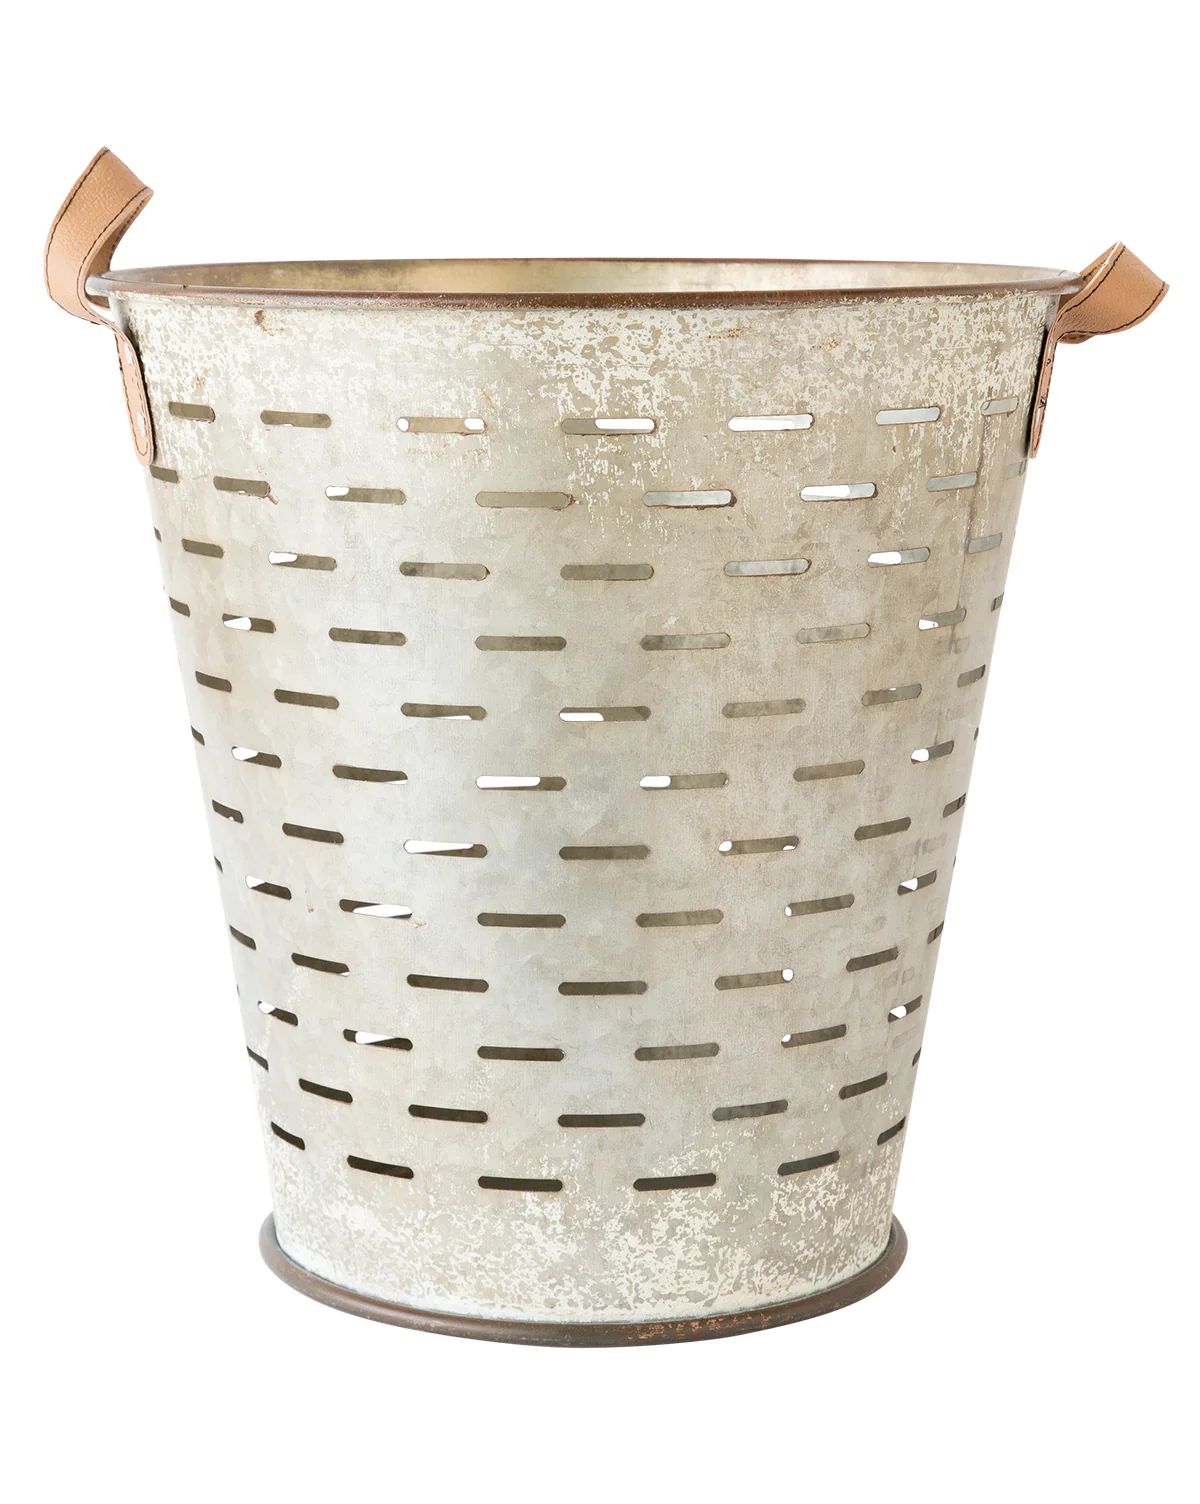 Olive Buckets | McGee & Co.